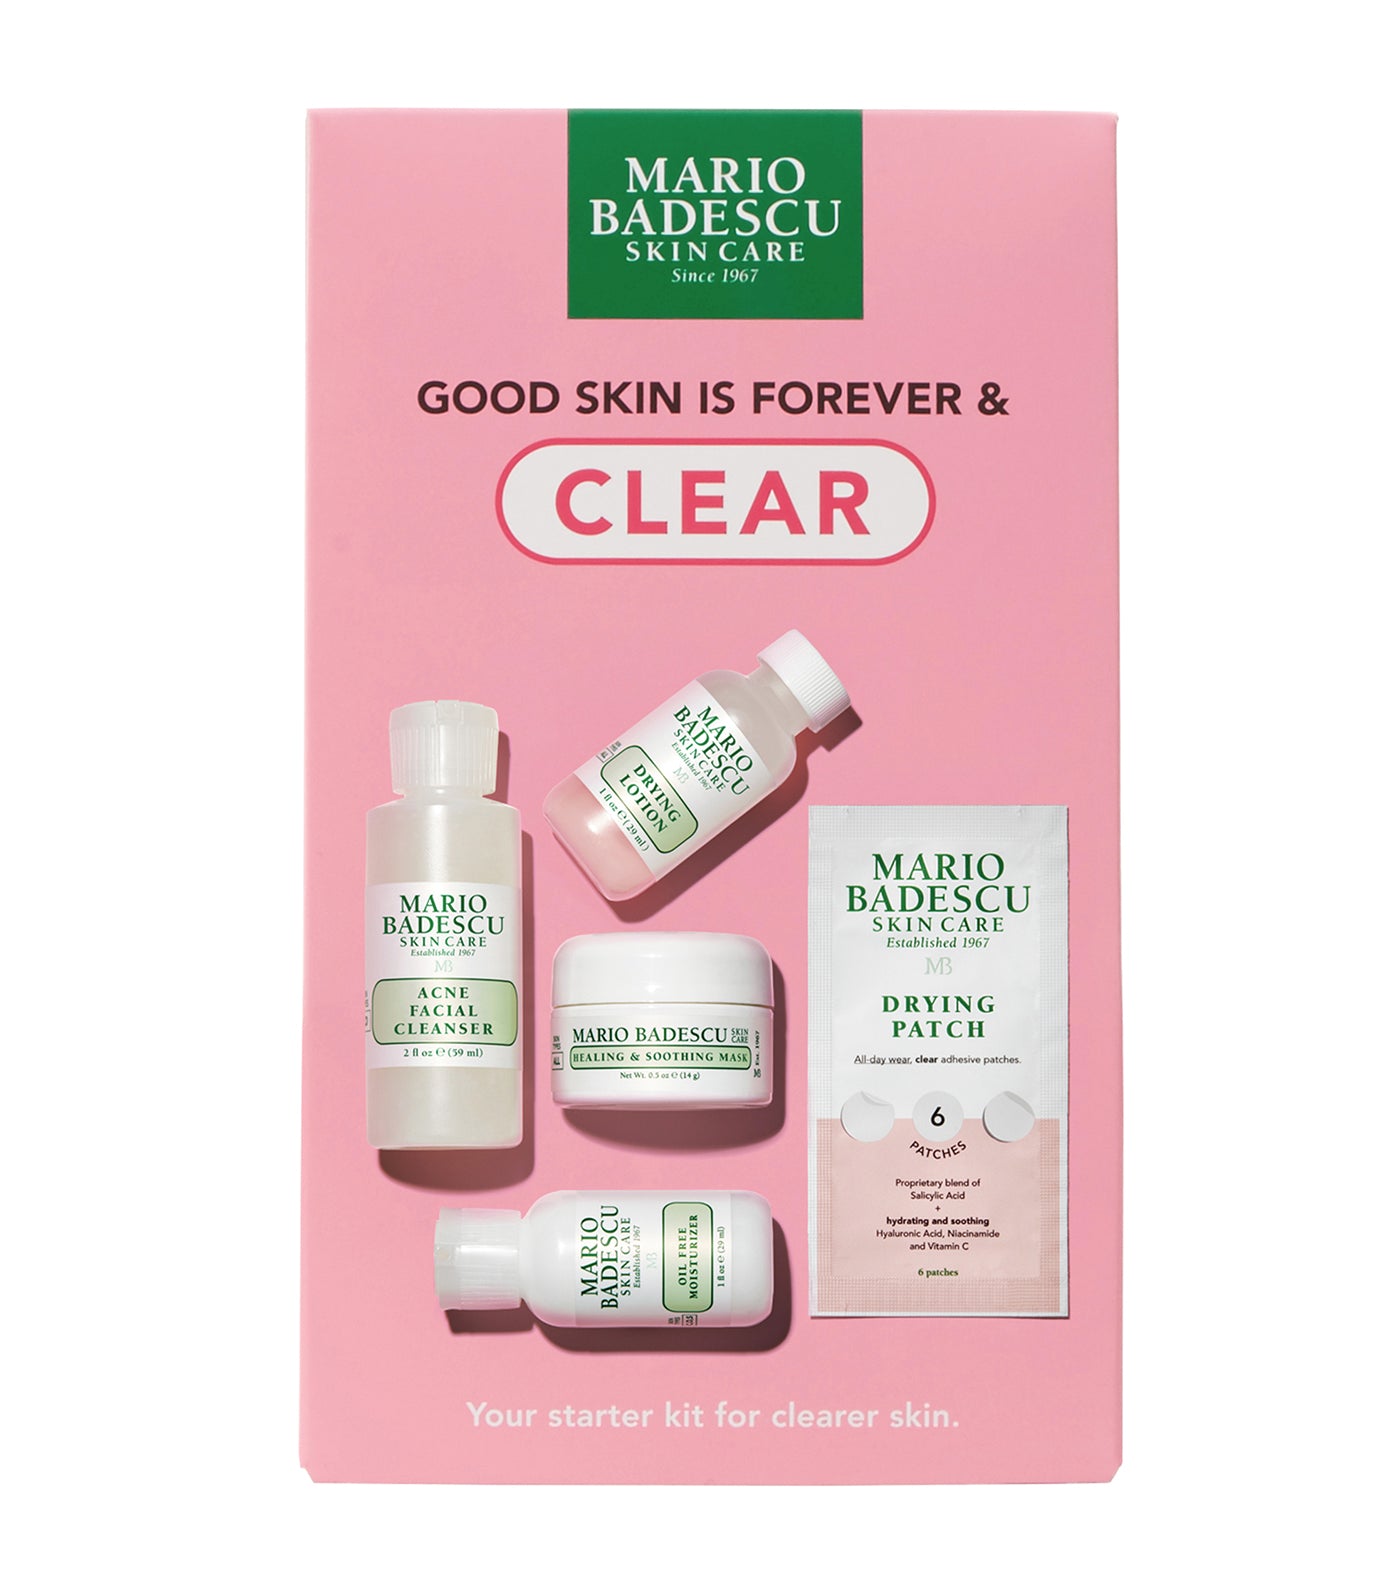 Good Skin is Forever & Clear